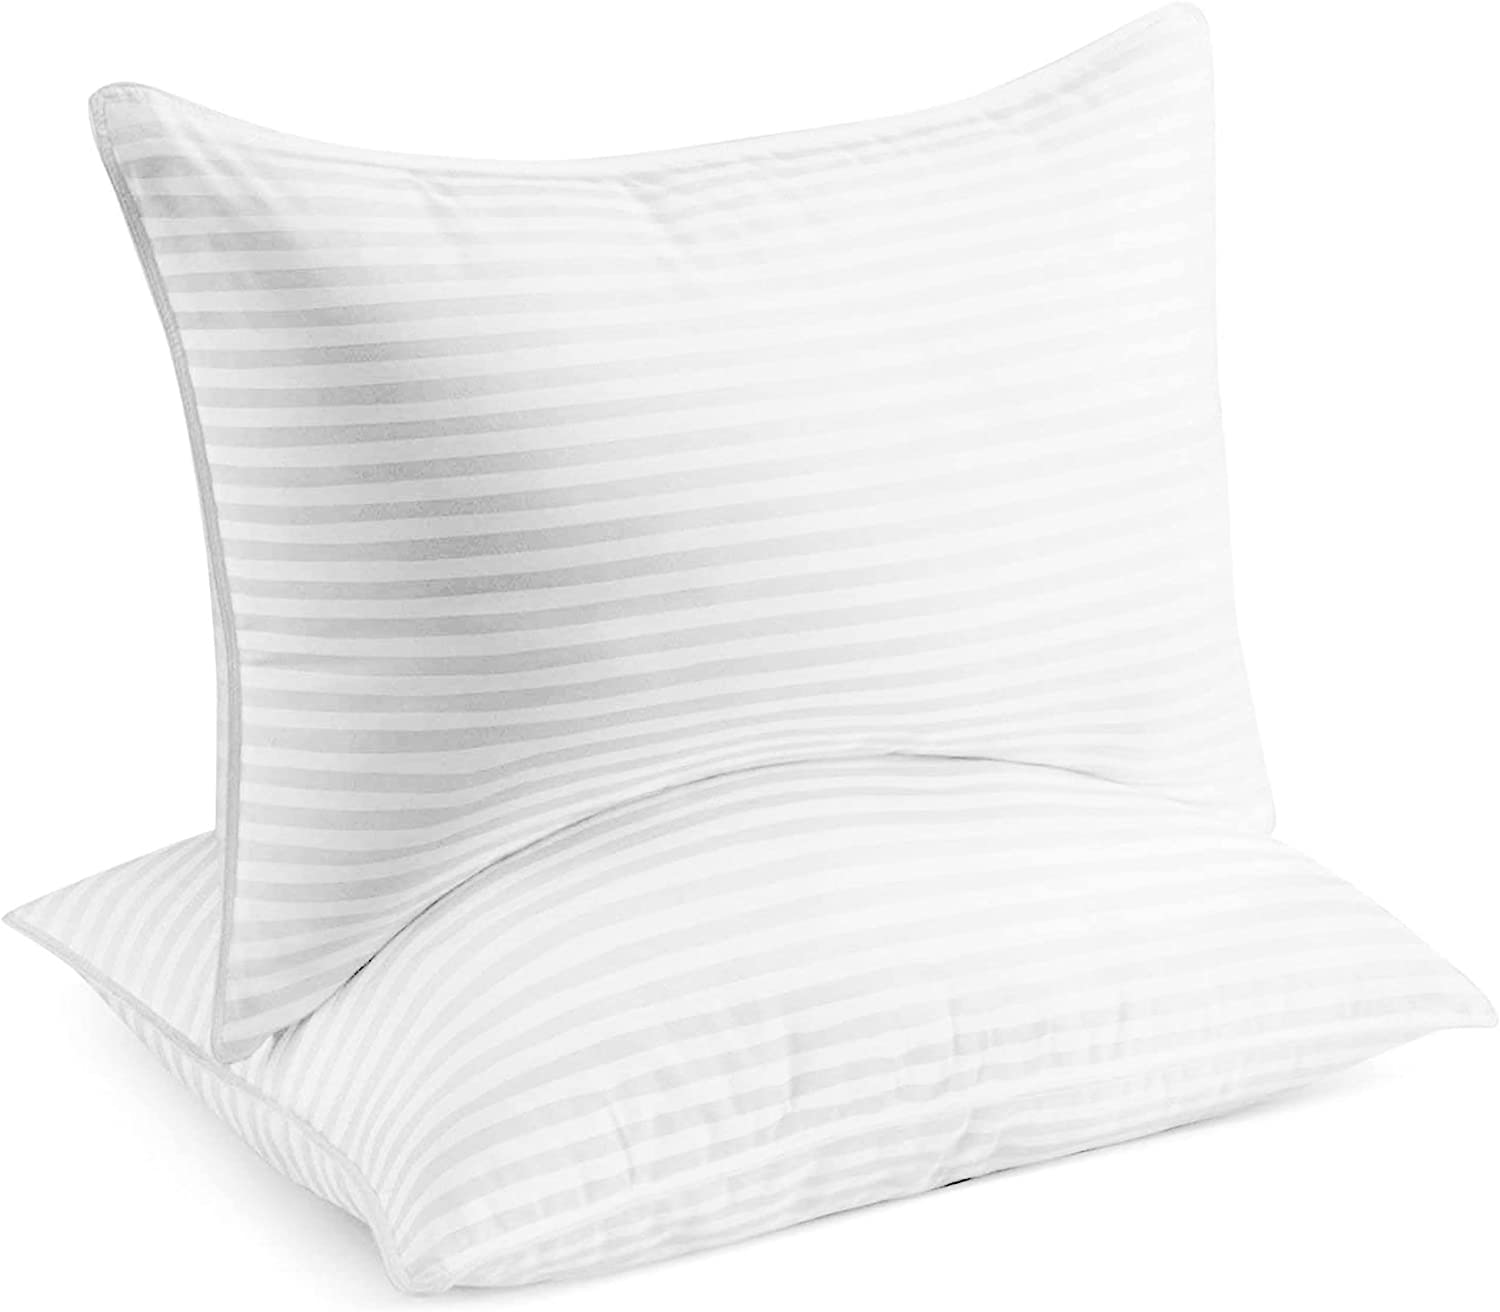 https://www.northcarolinacharm.com/wp-content/uploads/2022/07/Beckham-Hotel-Collection-Bed-Pillows-for-Sleeping-Queen-Size-Set-of-2-Cooling-Luxury-Gel-Pillow-for-Back-Stomach-or-Side-Sleepers.jpg